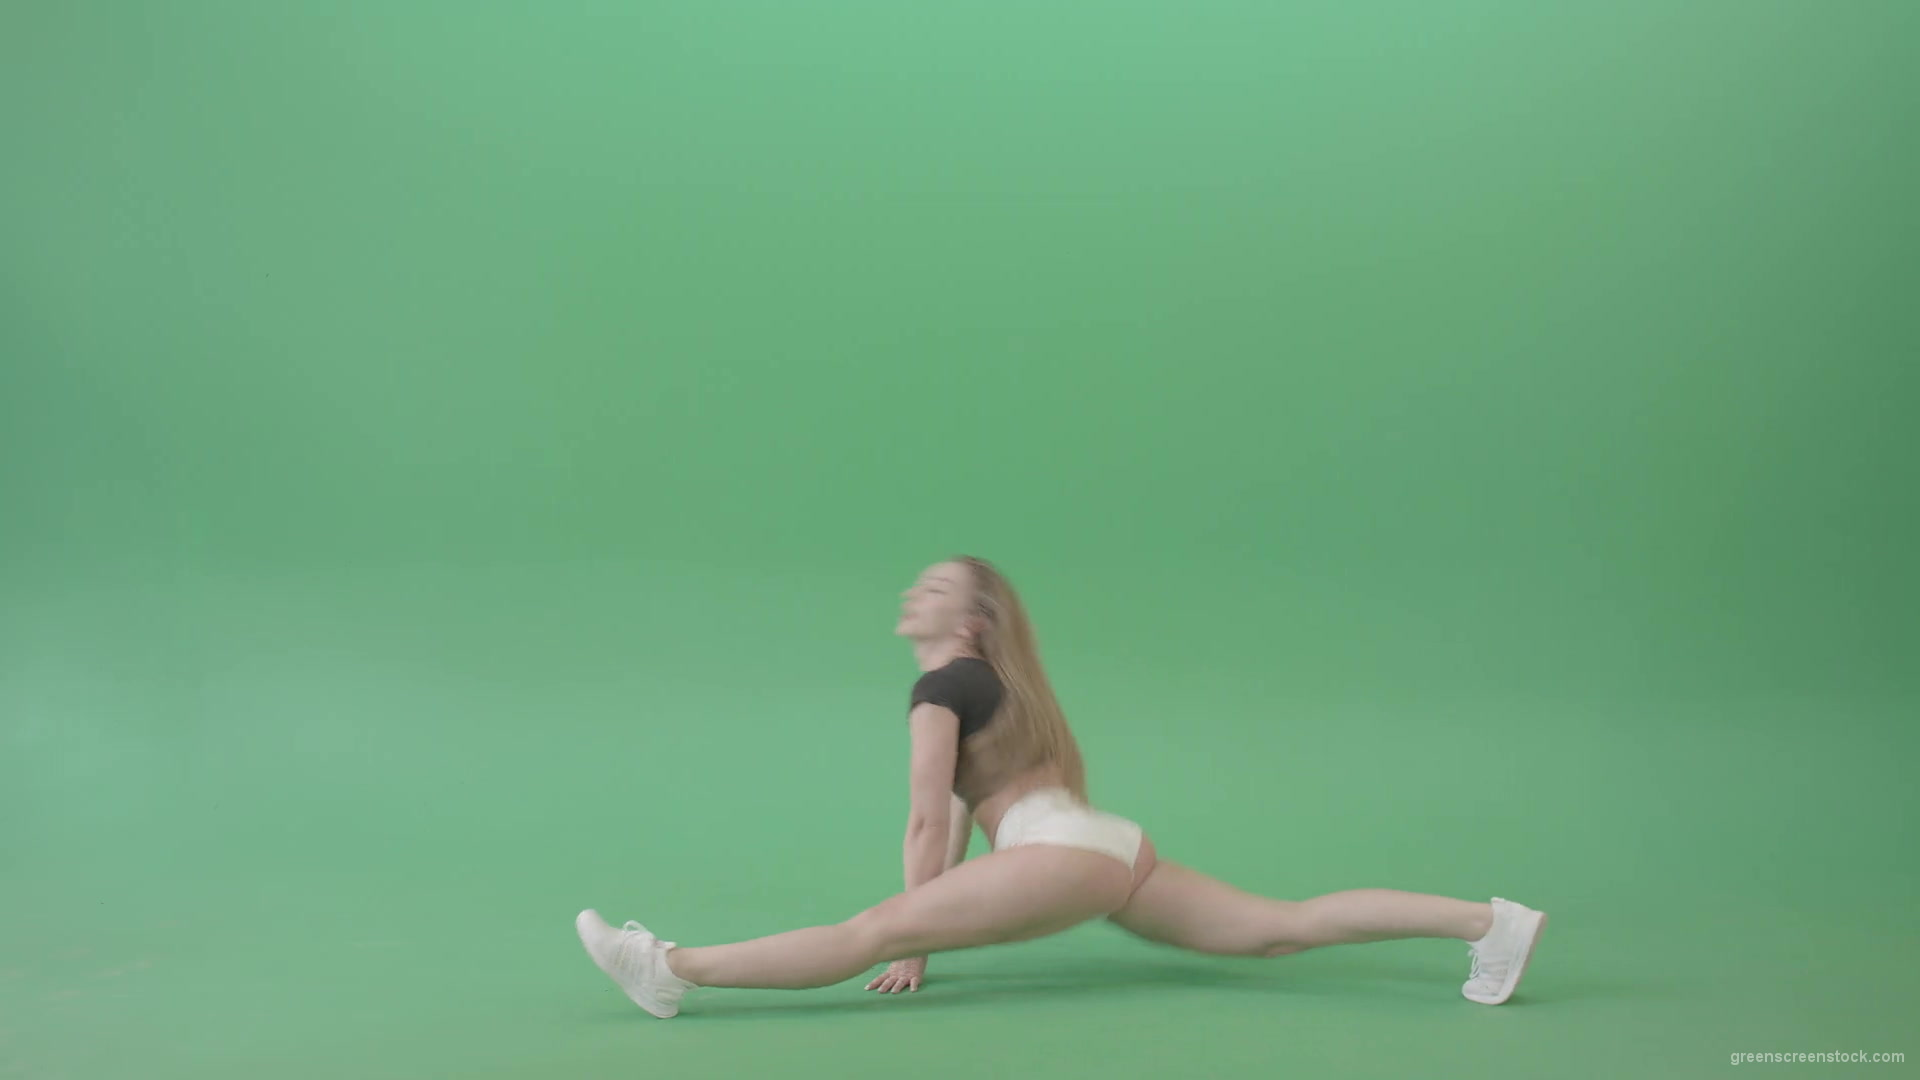 American-girl-twerking-ass-isolated-on-green-background-4k-Video-Footage-1920_006 Green Screen Stock